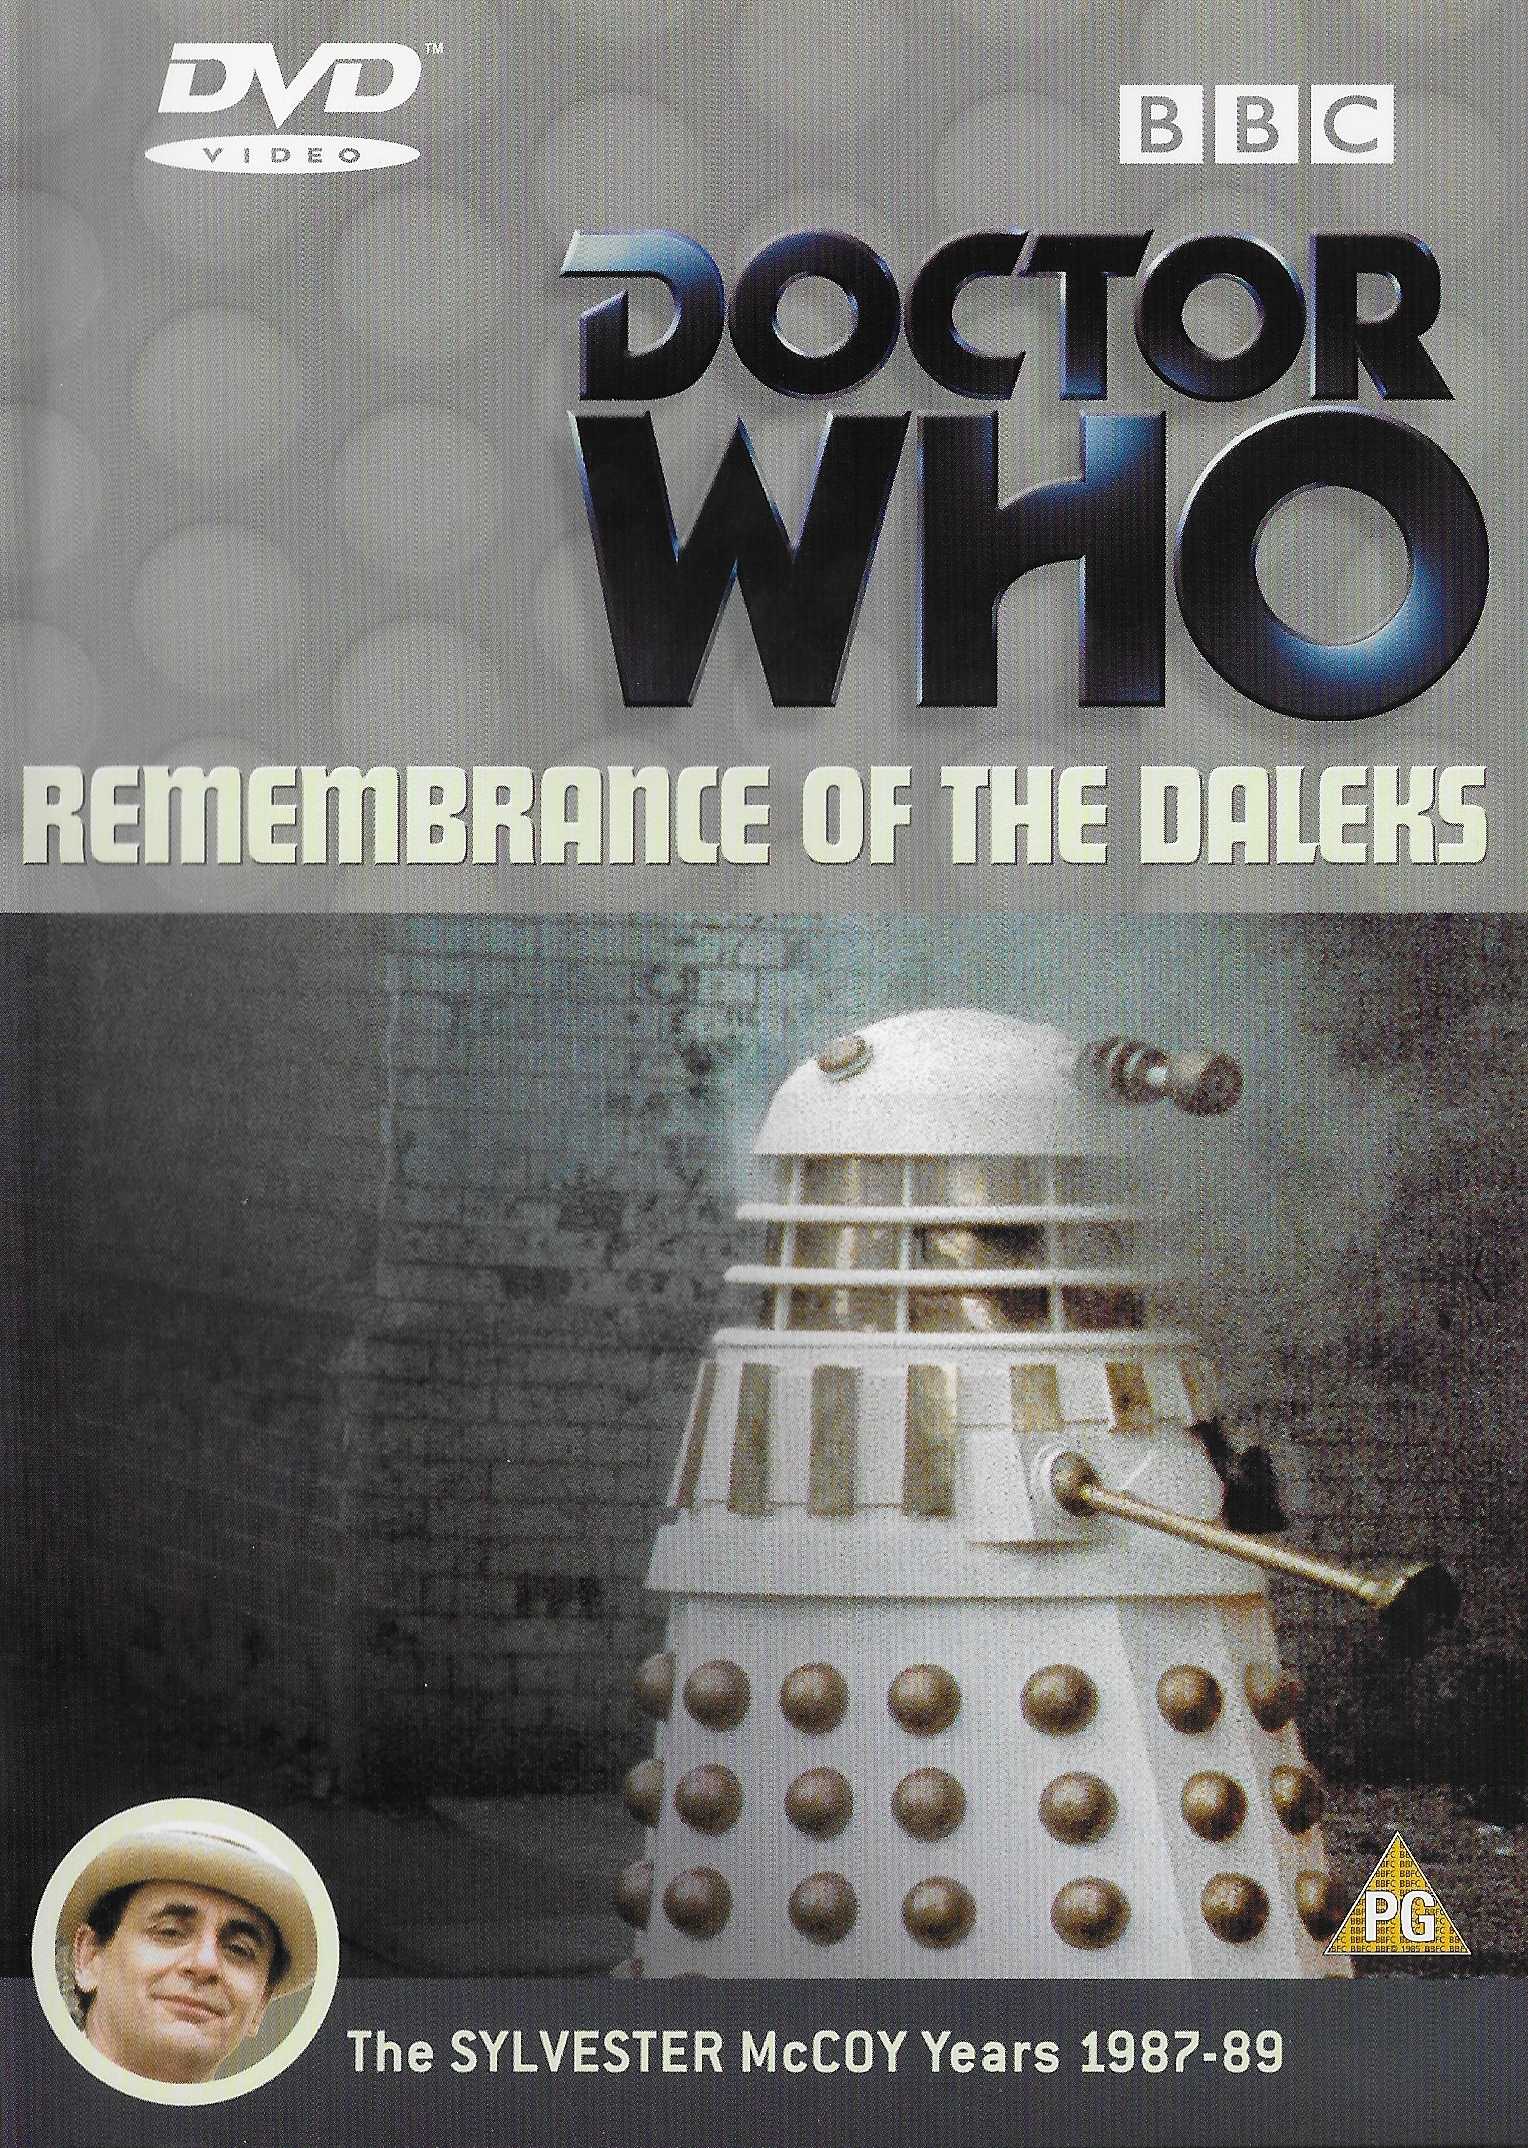 Picture of Doctor Who - Remembrance of the Daleks by artist Ben Aaronovitch from the BBC dvds - Records and Tapes library